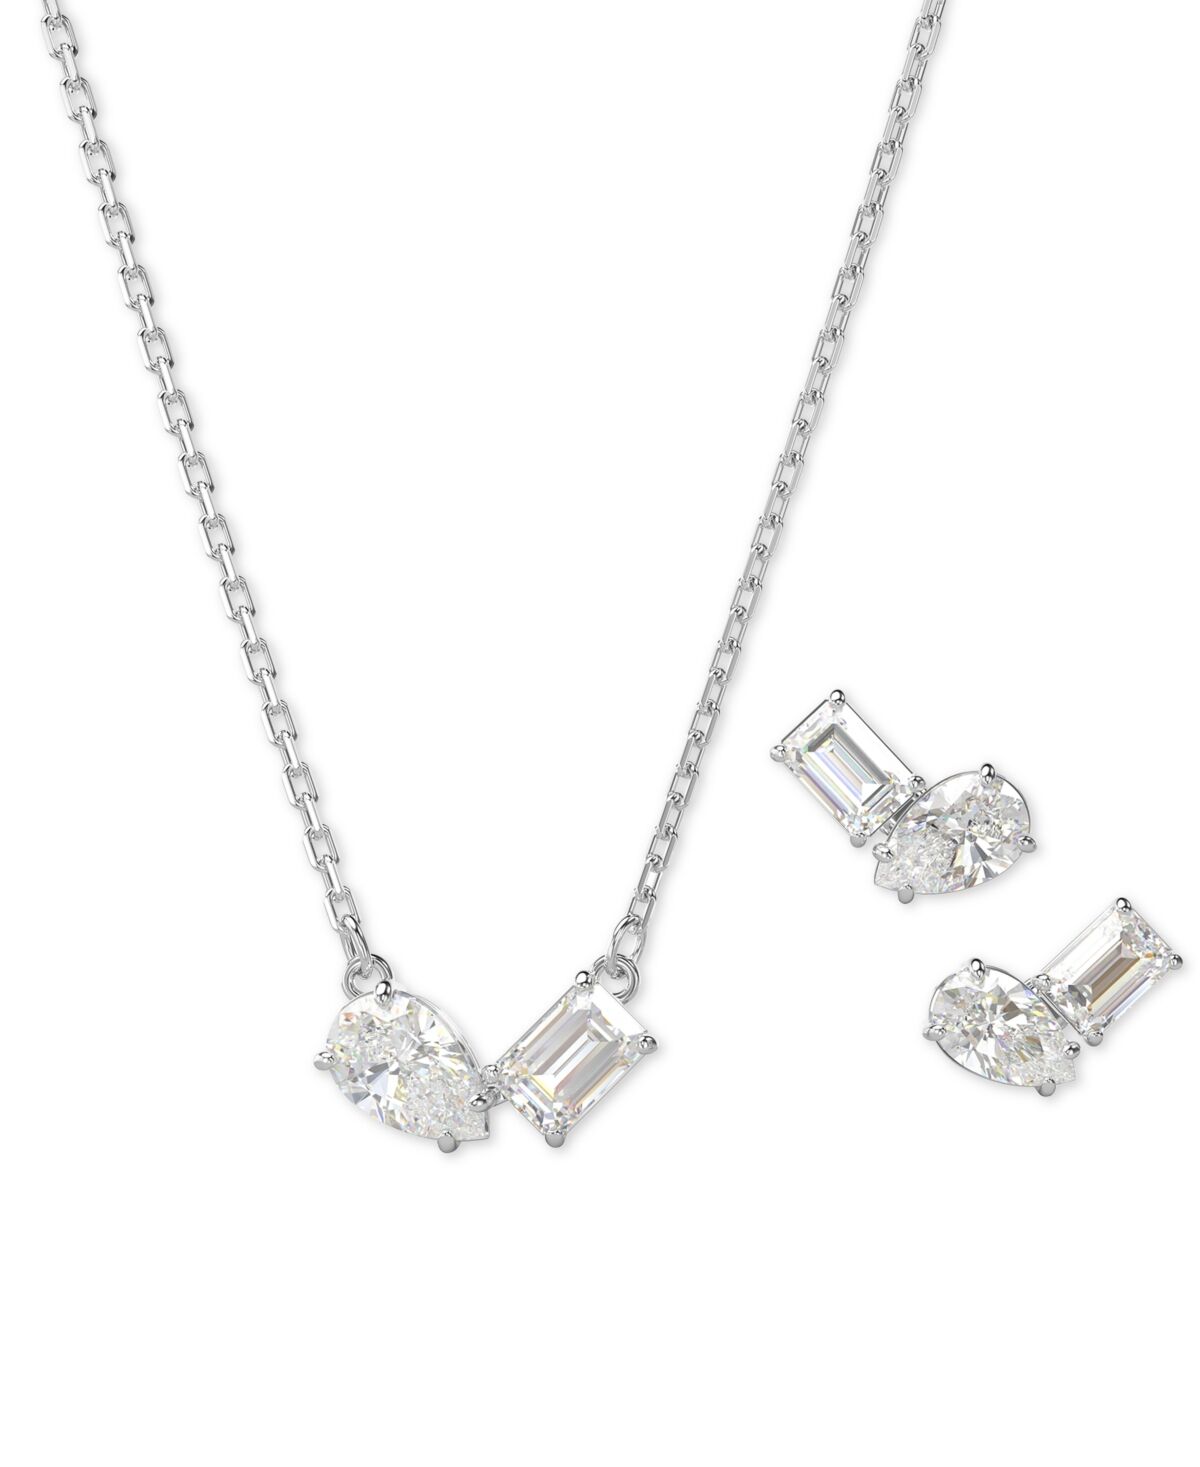 Swarovski Rhodium-Plated Mixed Crystal Pendant Necklace & Stud Earrings Set - Silver